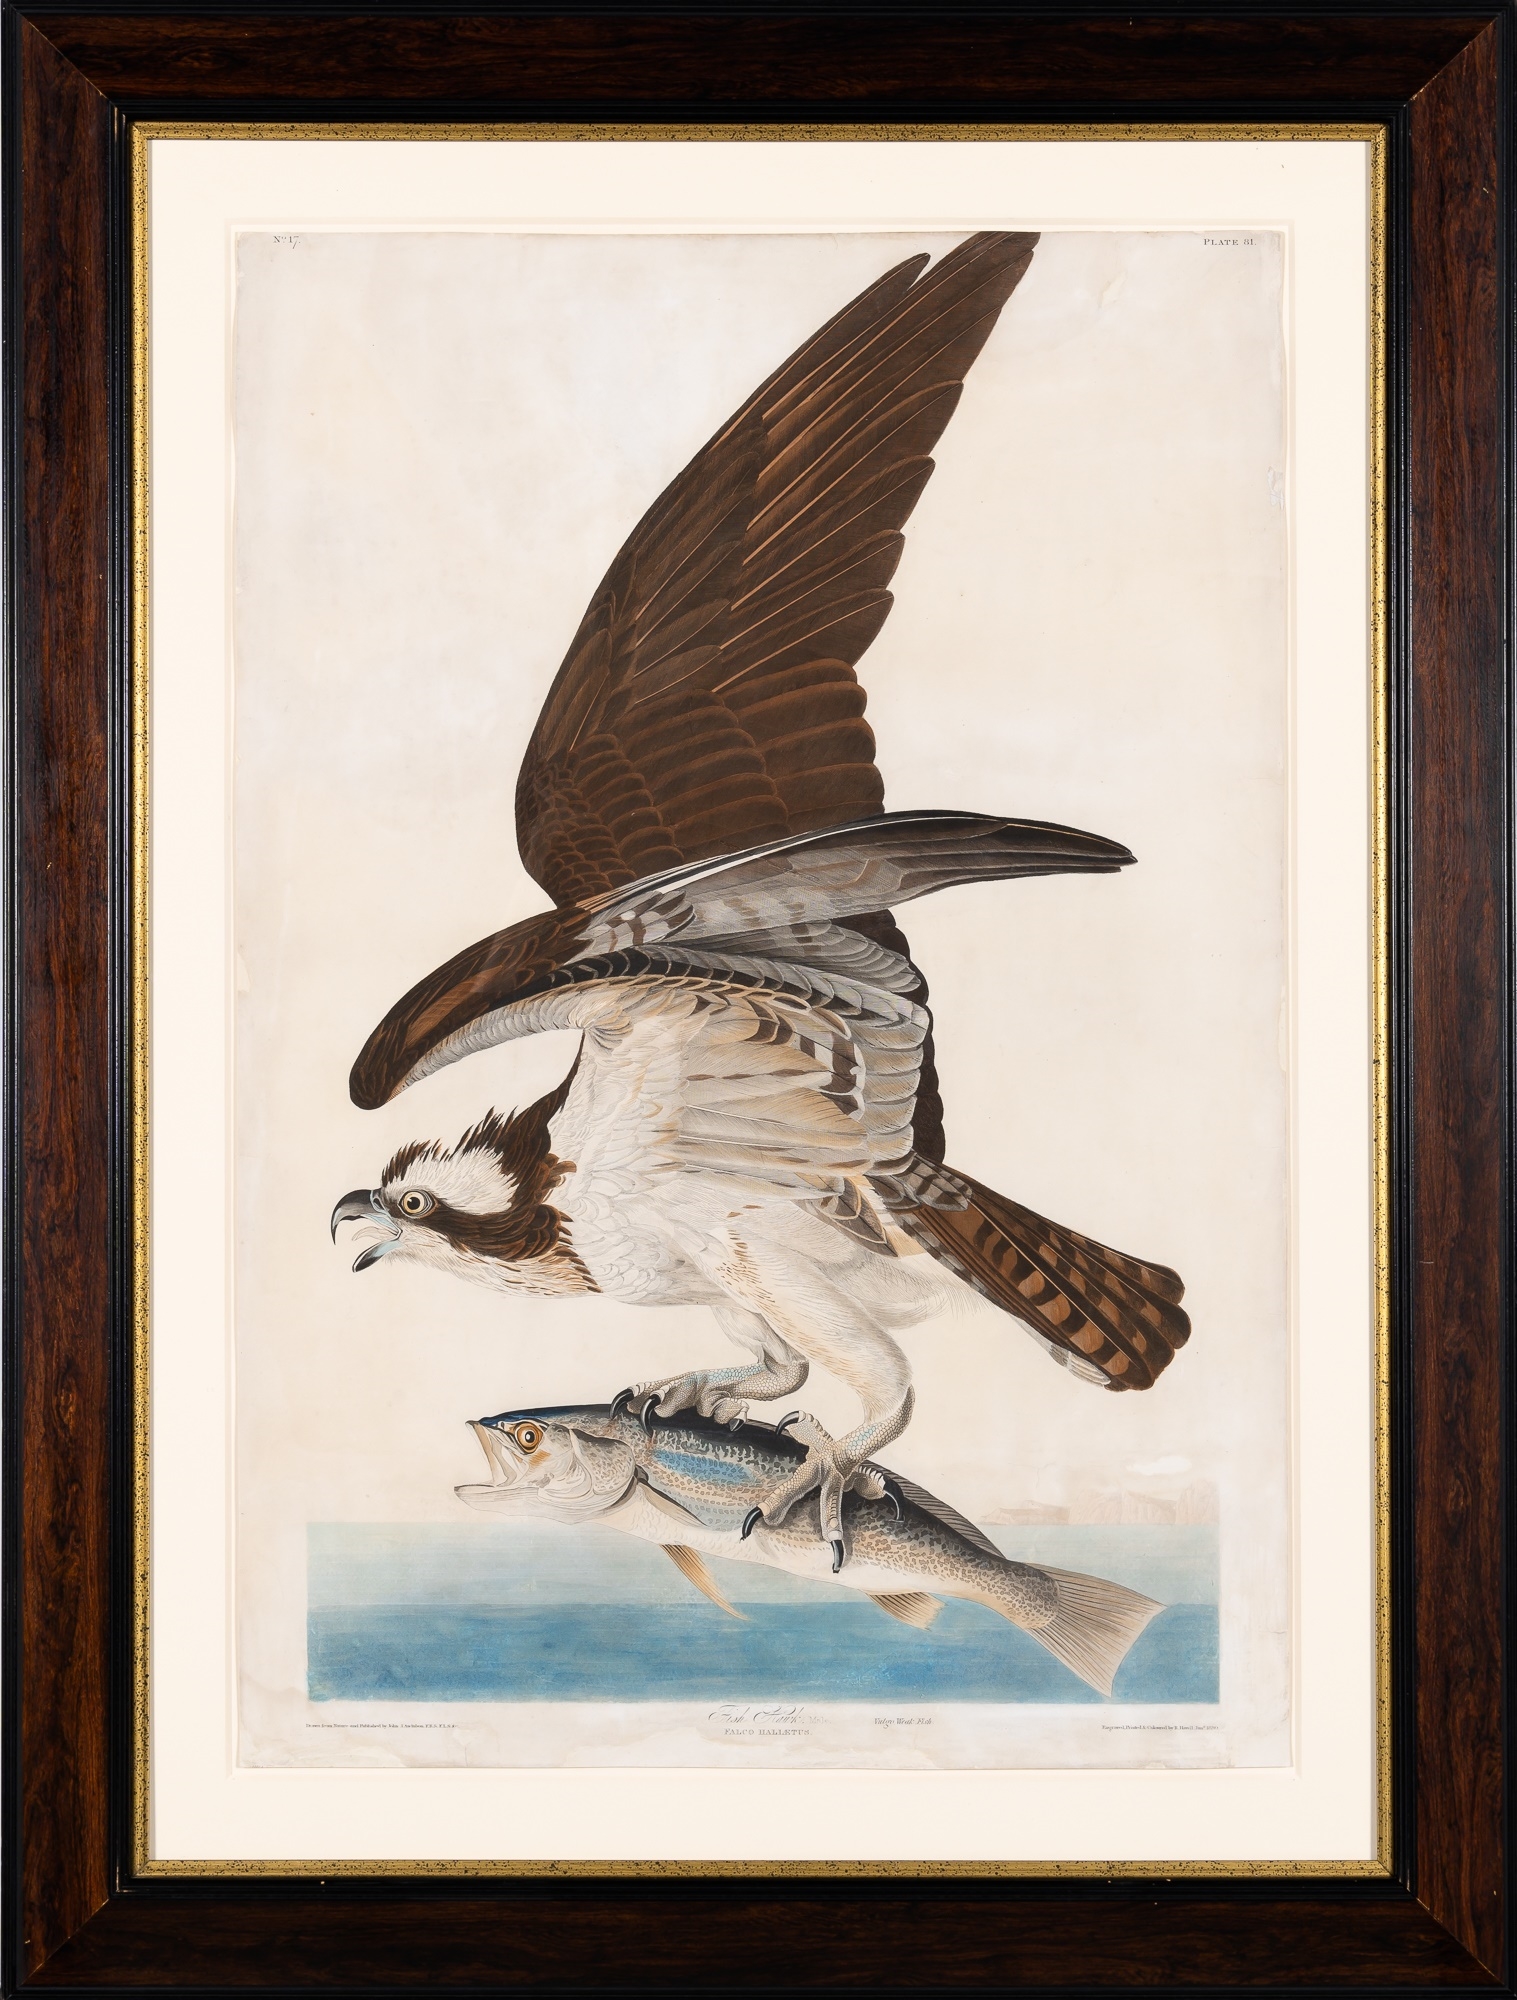 Artwork by John James Audubon, The Birds of America, Made of Hand-colored aquatint, engraving and etching on wove paper